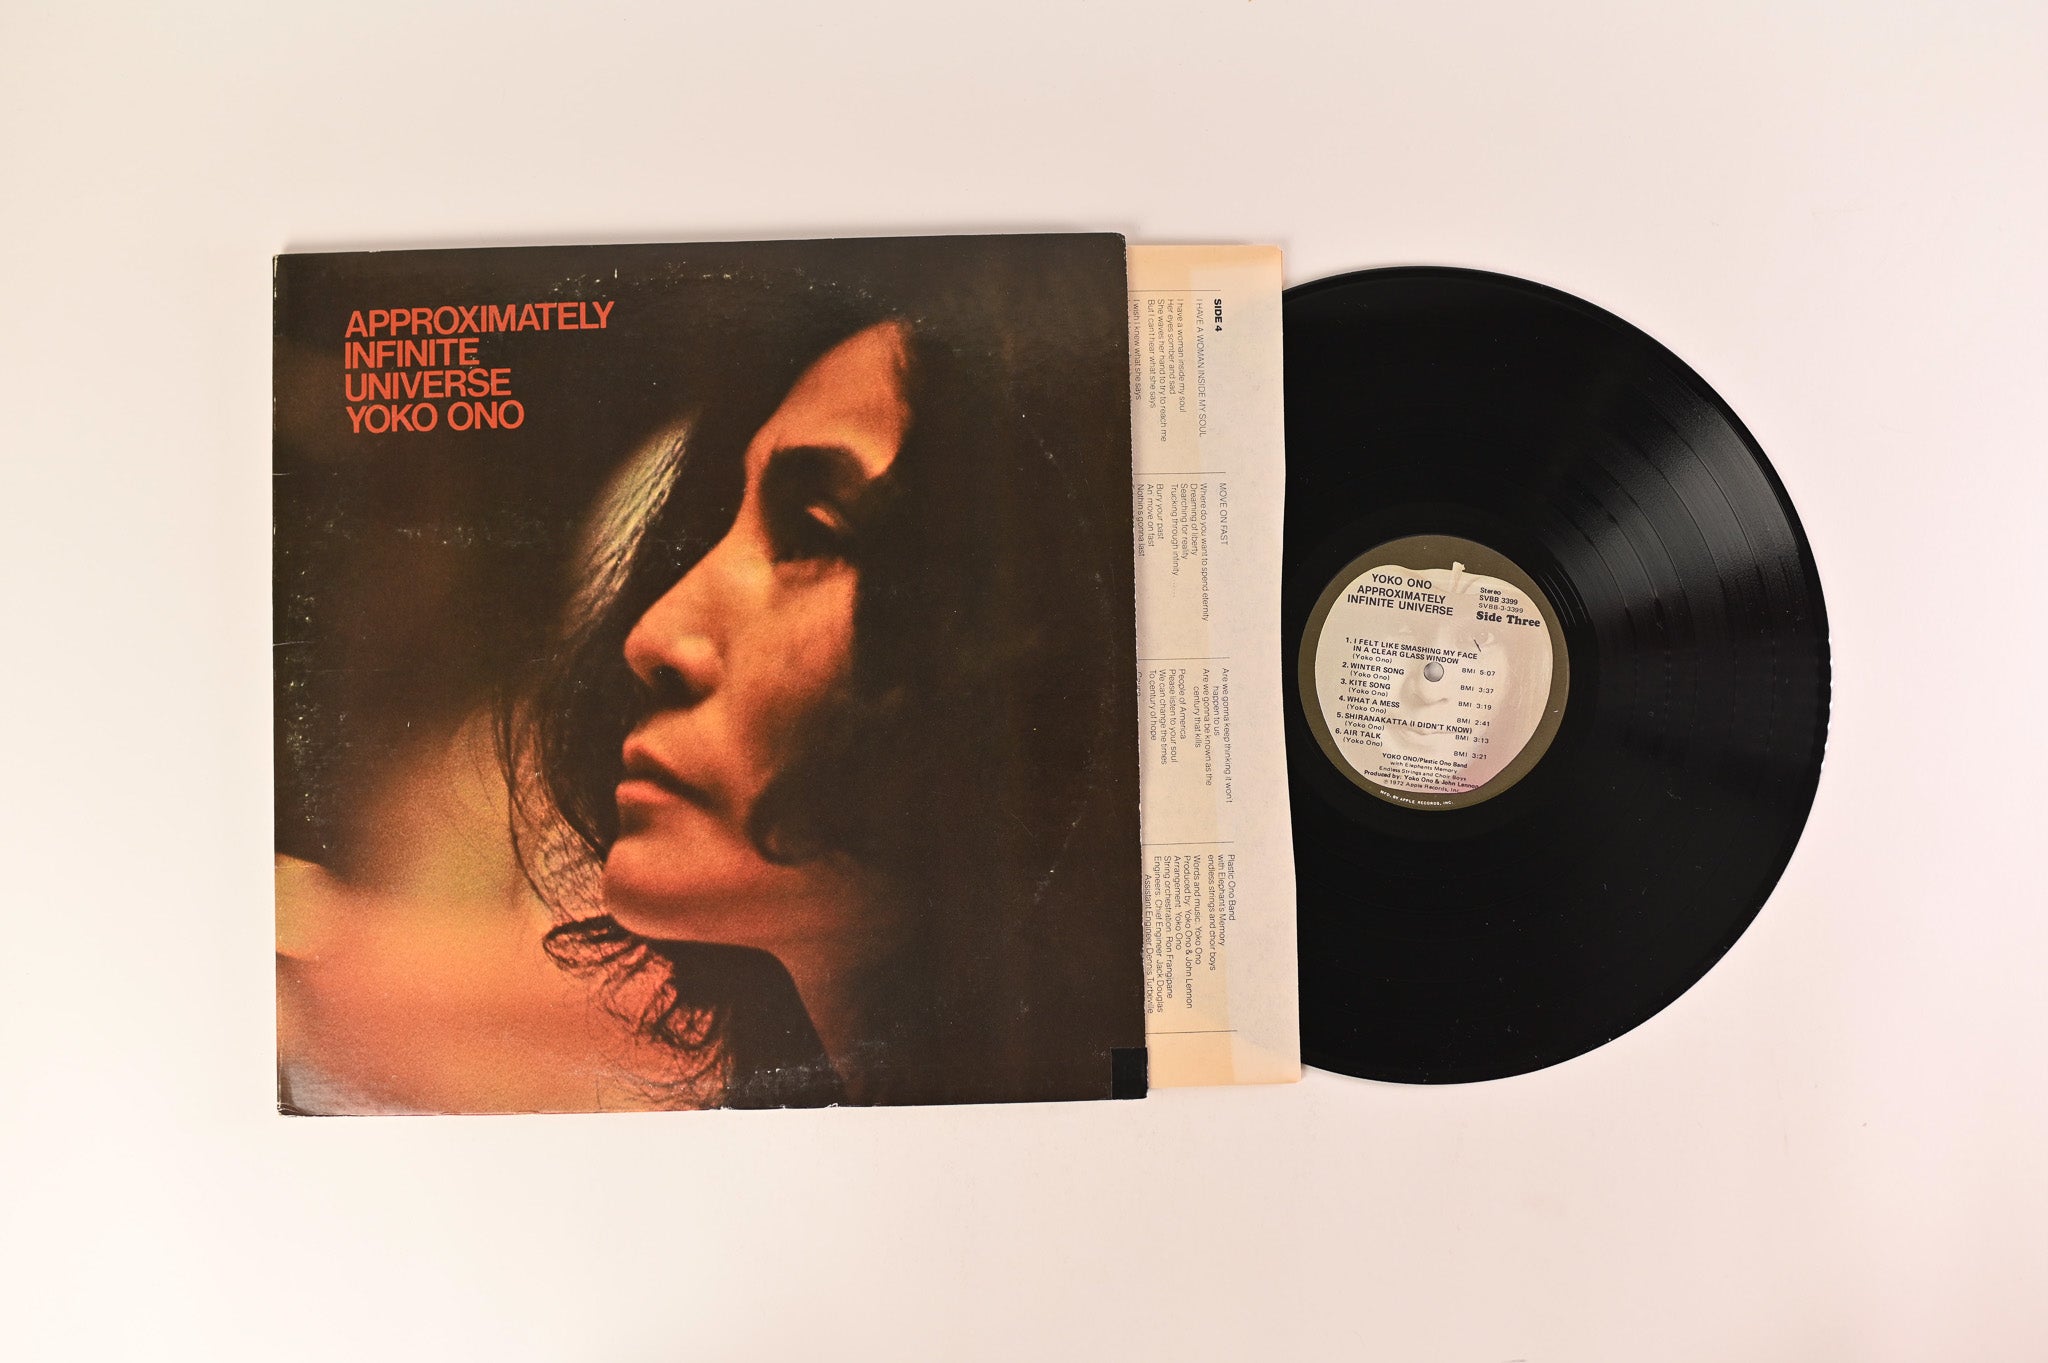 Yoko Ono With The Plastic Ono Band And Elephants Memory – Approximately Infinite Universe on Apple Records